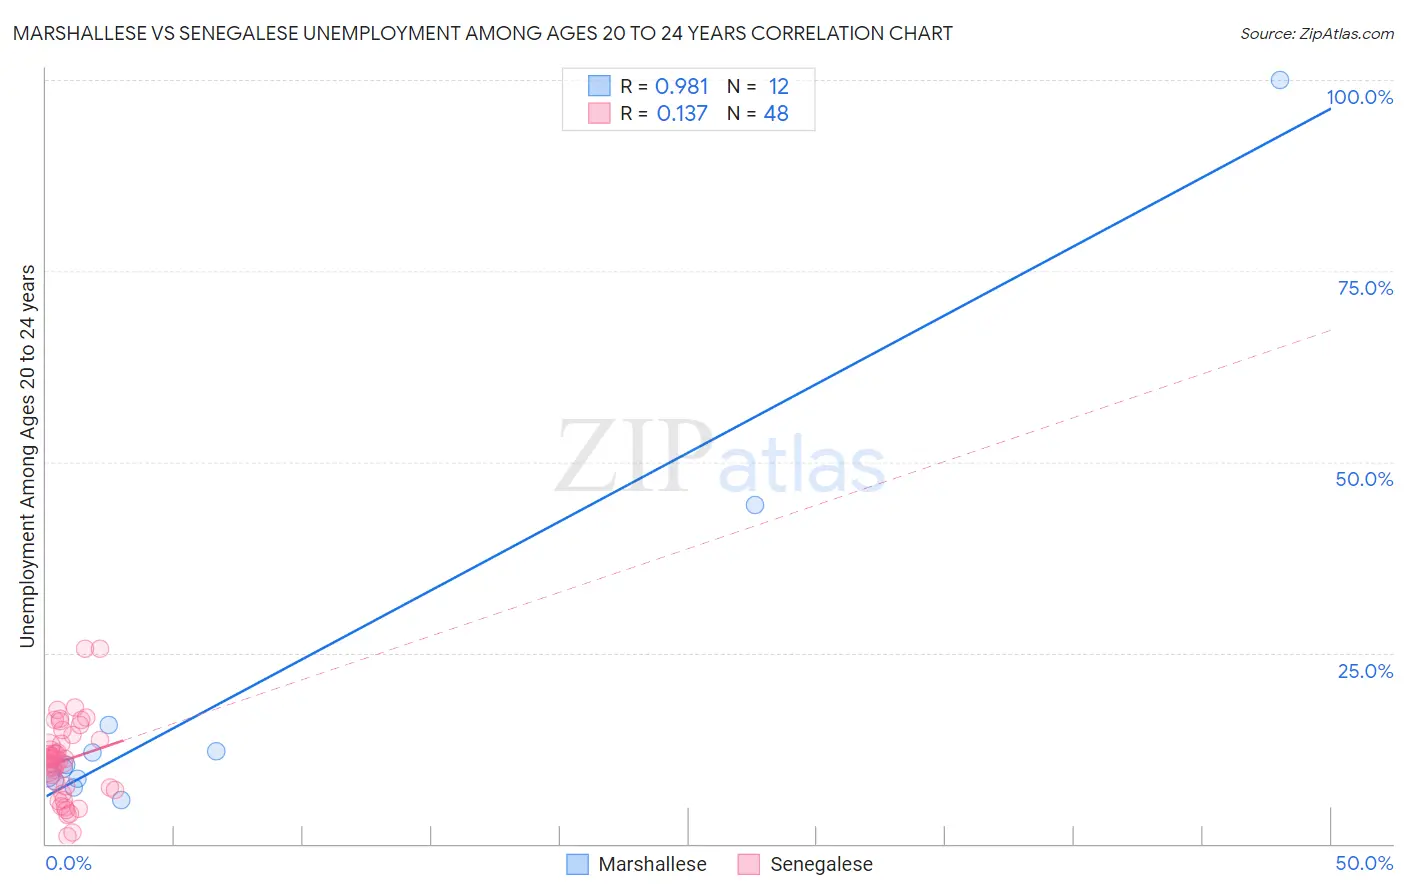 Marshallese vs Senegalese Unemployment Among Ages 20 to 24 years